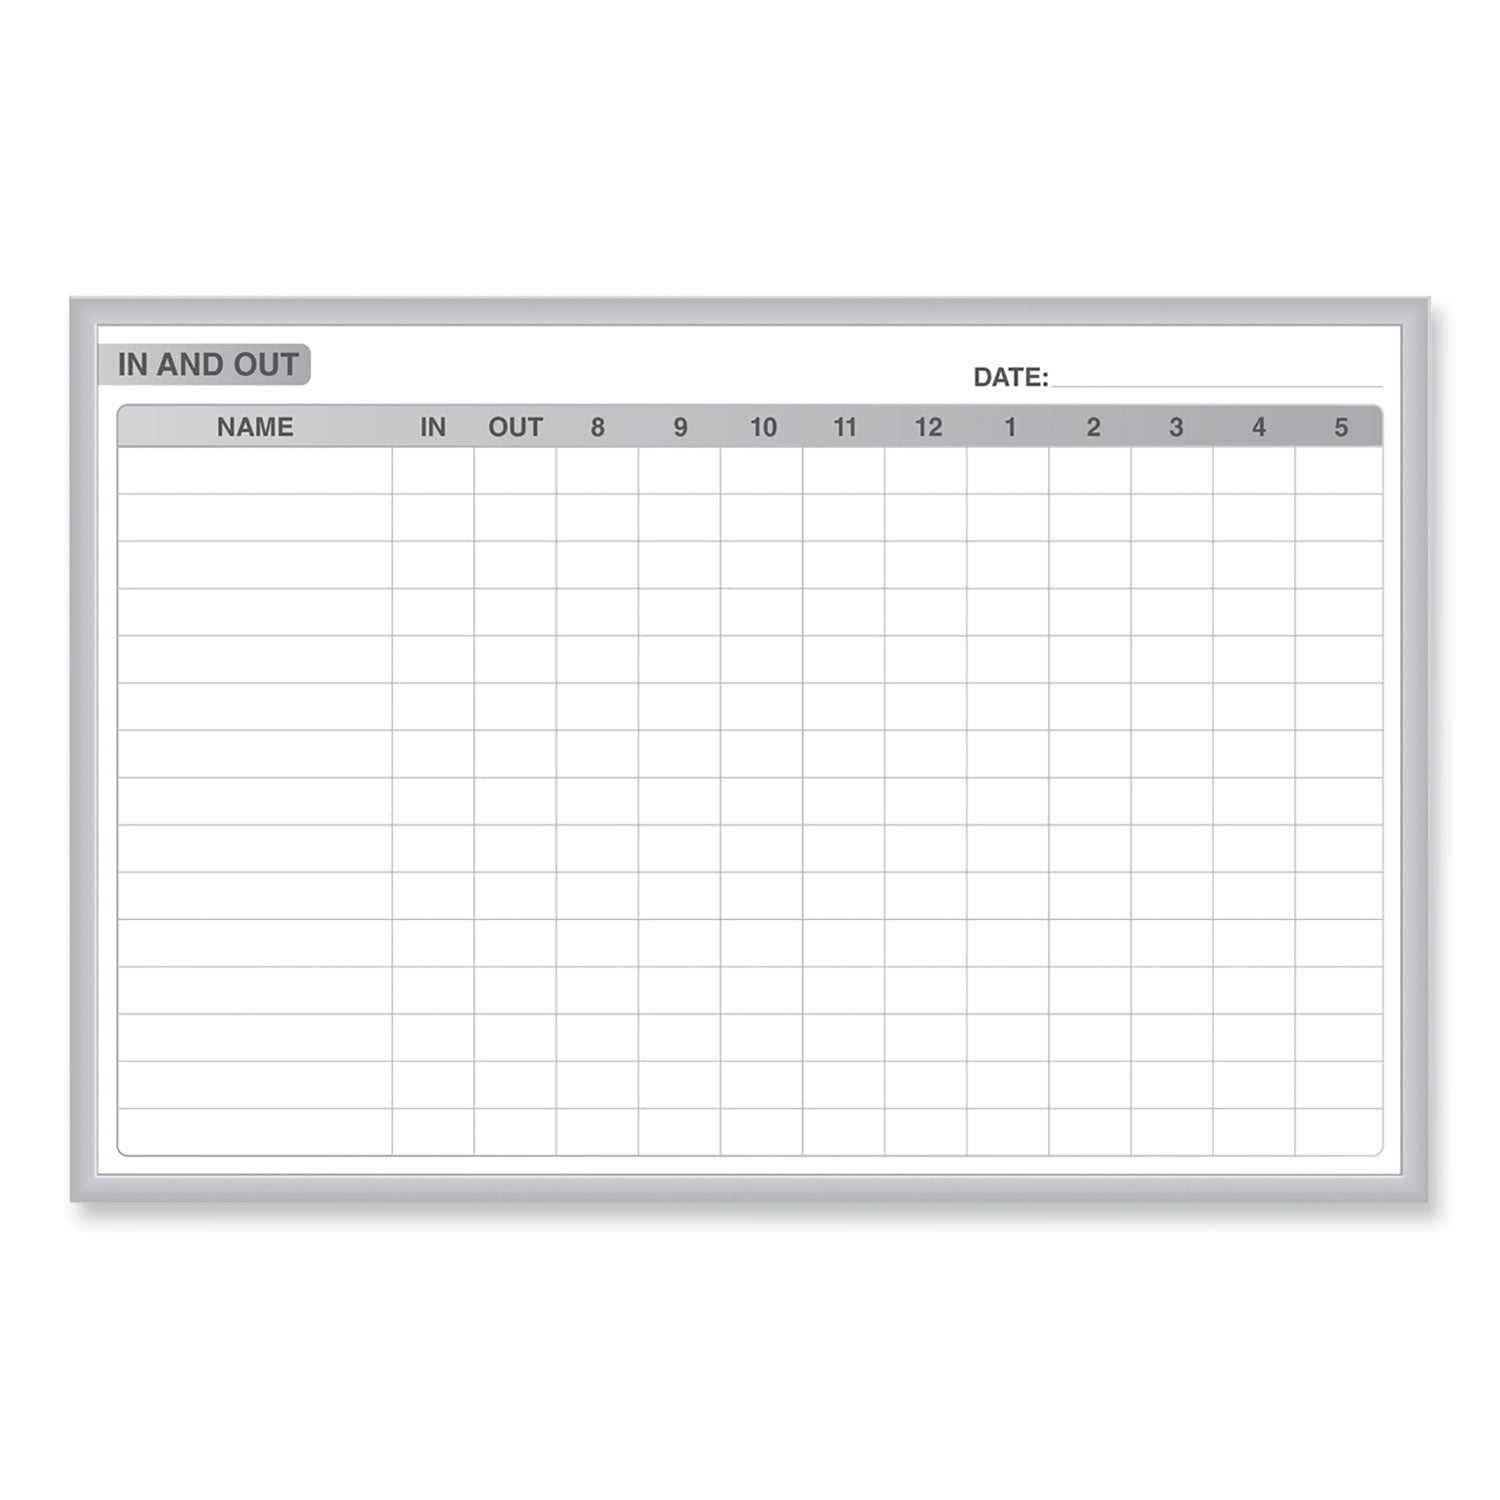 in-out-magnetic-whiteboard-725-x-485-white-gray-surface-satin-aluminum-frame-ships-in-7-10-business-days_ghegrpm301e46 - 1